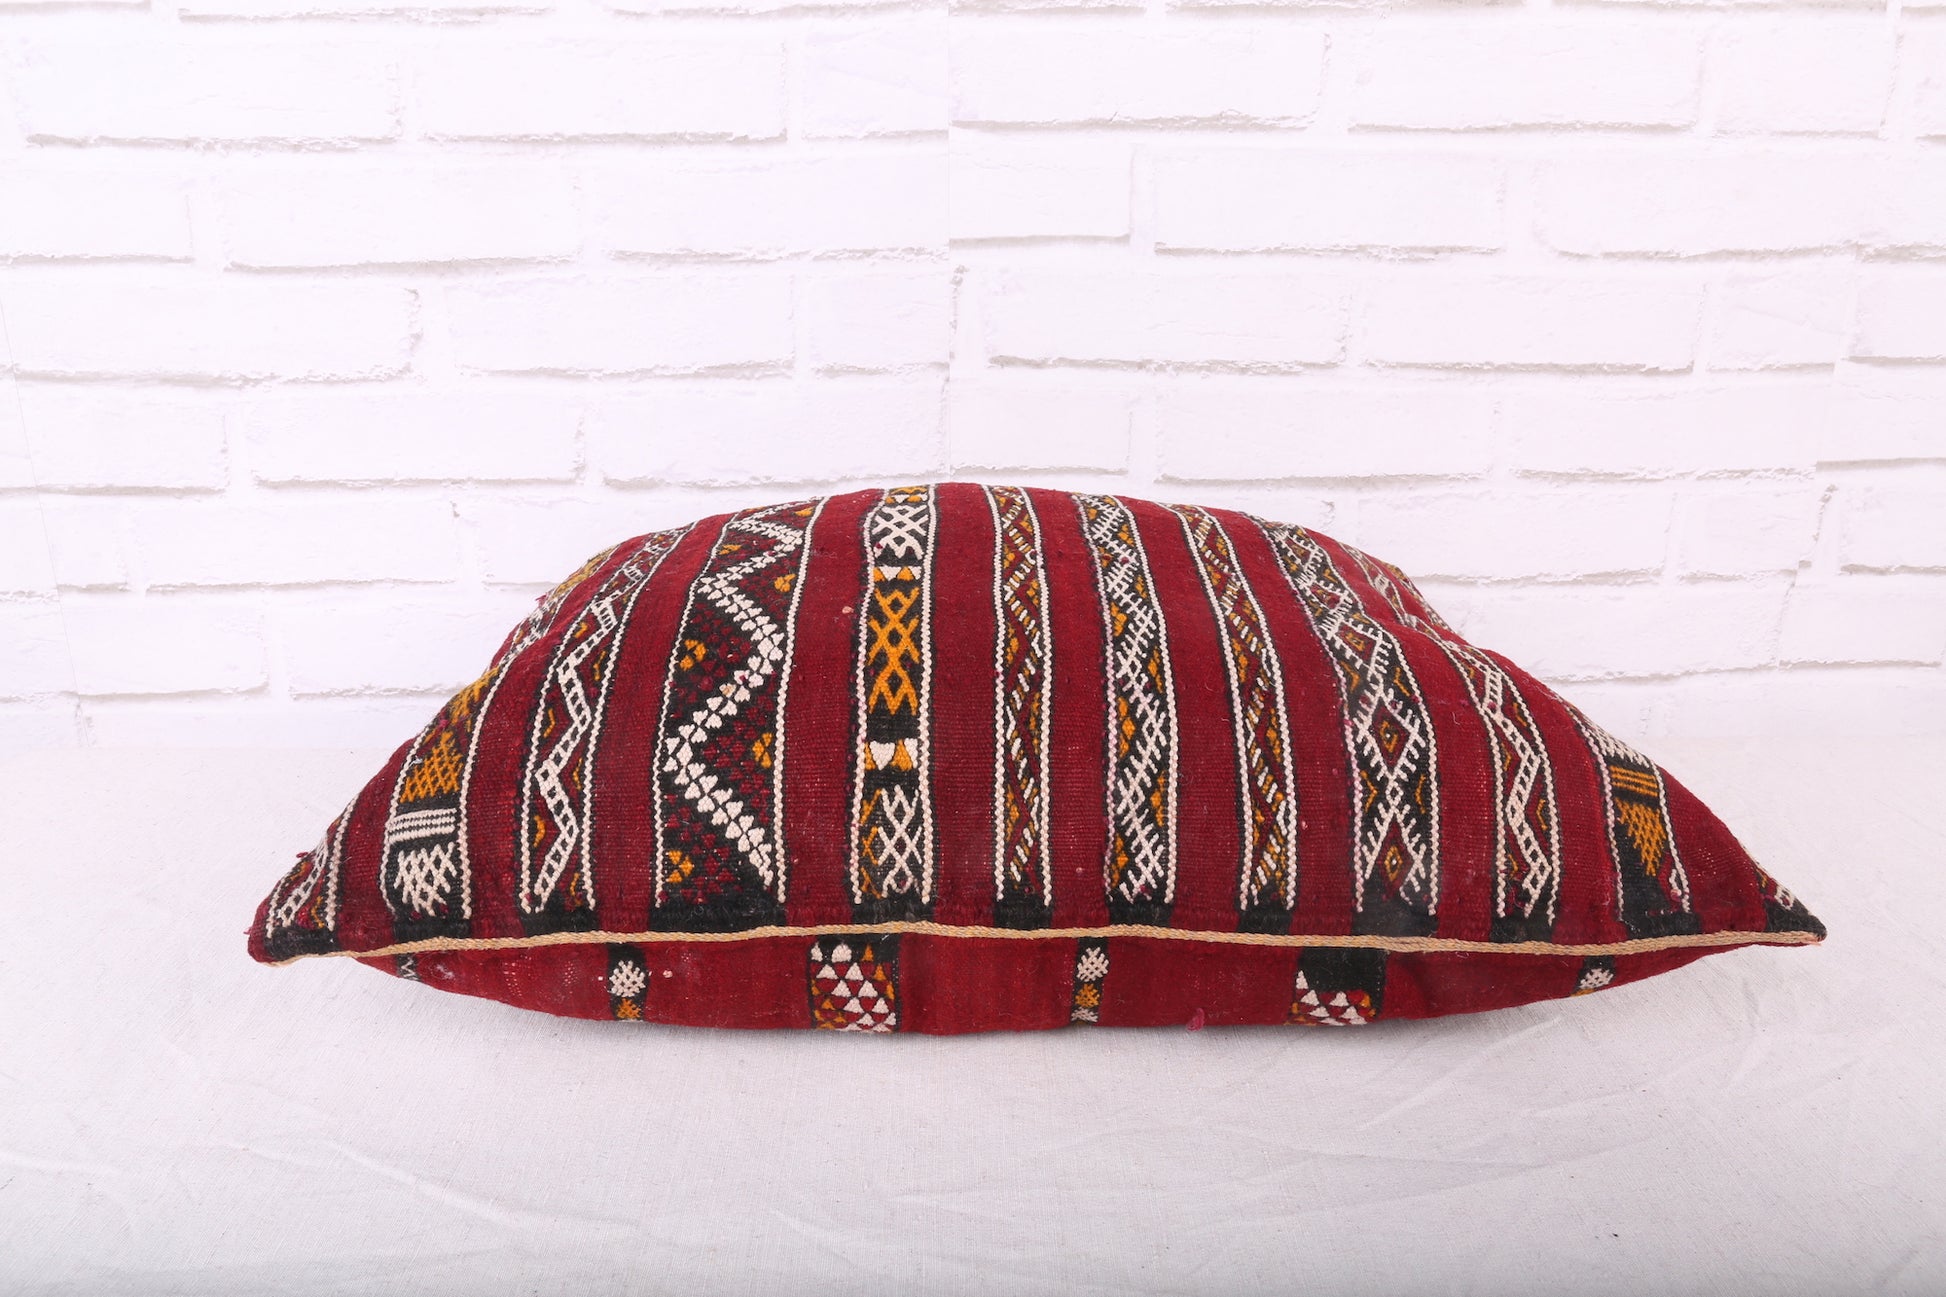 Moroccan Style Pillow 16.9 inches X 21.2 inches